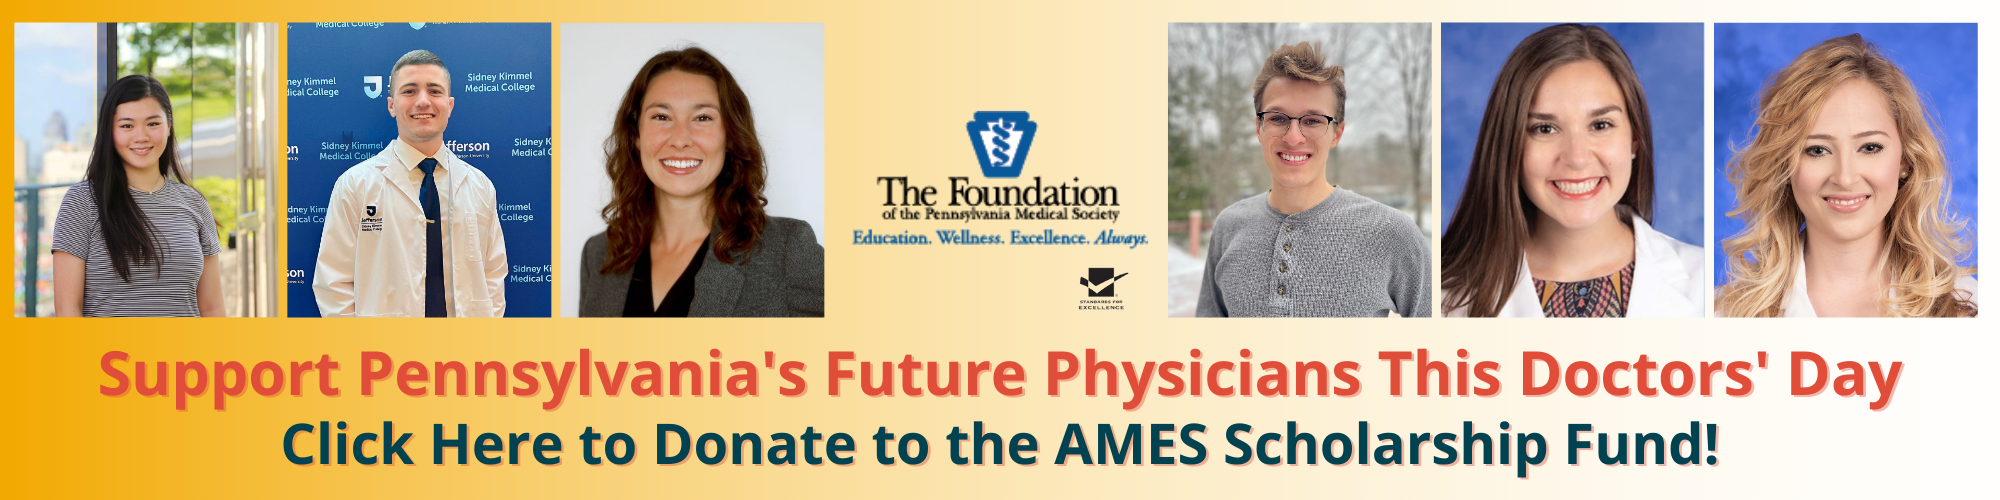 Support Pennsylvania_s Future Physicians Donate to the AMES Scholarship Fund! (5) (1)